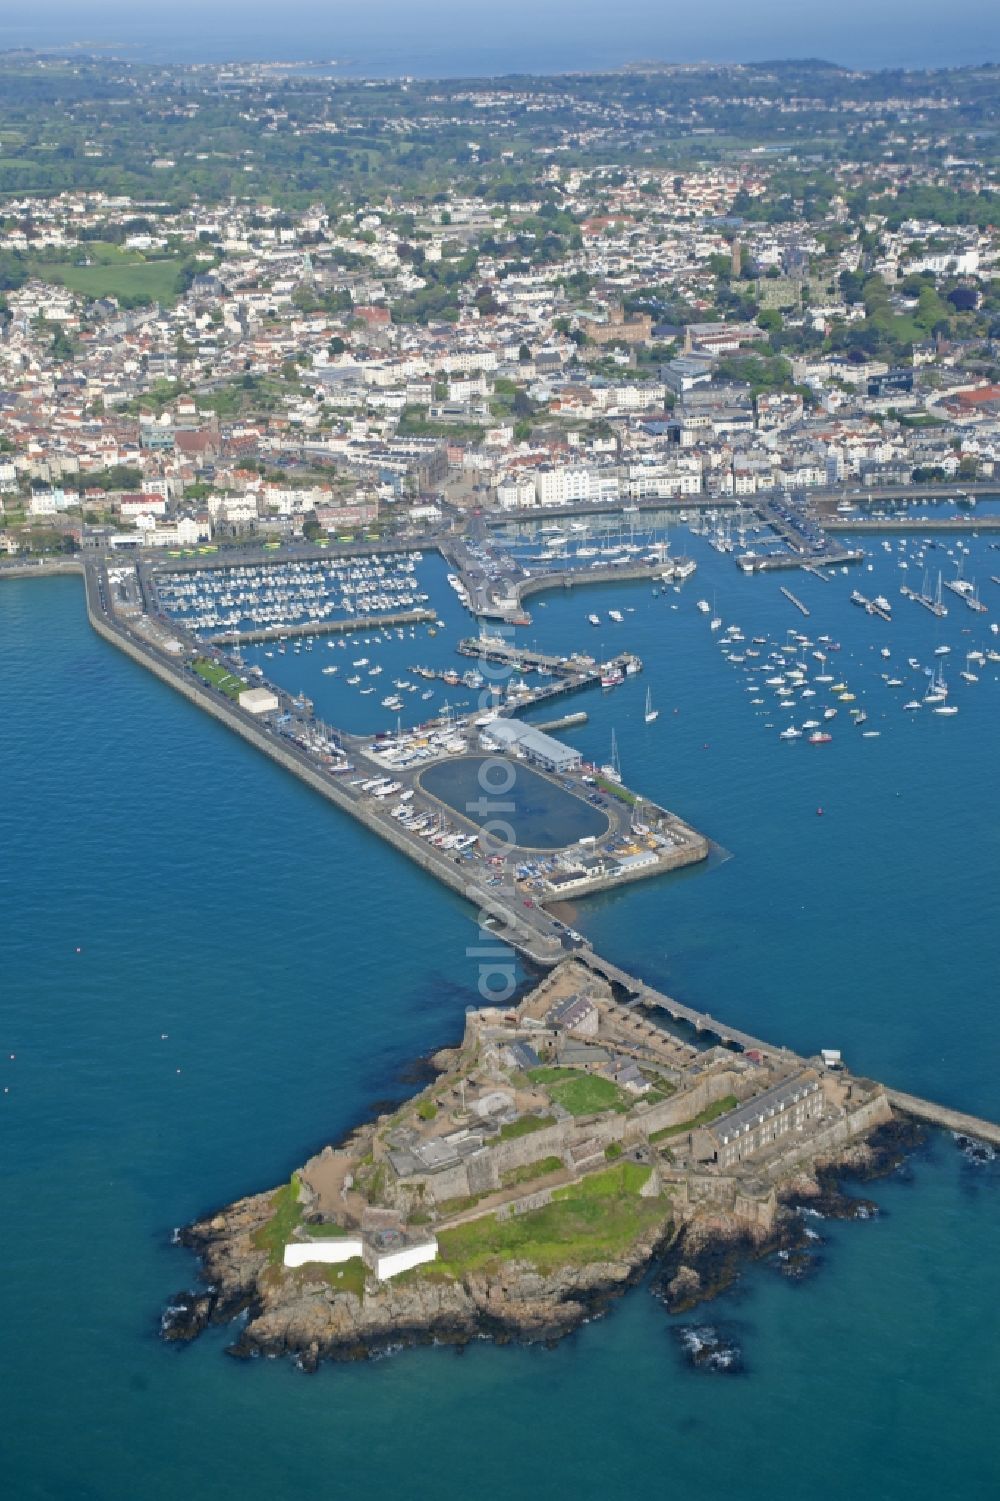 St. Peter Port from above - St Peter Port to Castle Cornet on the Channel Island of Guernsey in the UK - Great Britain